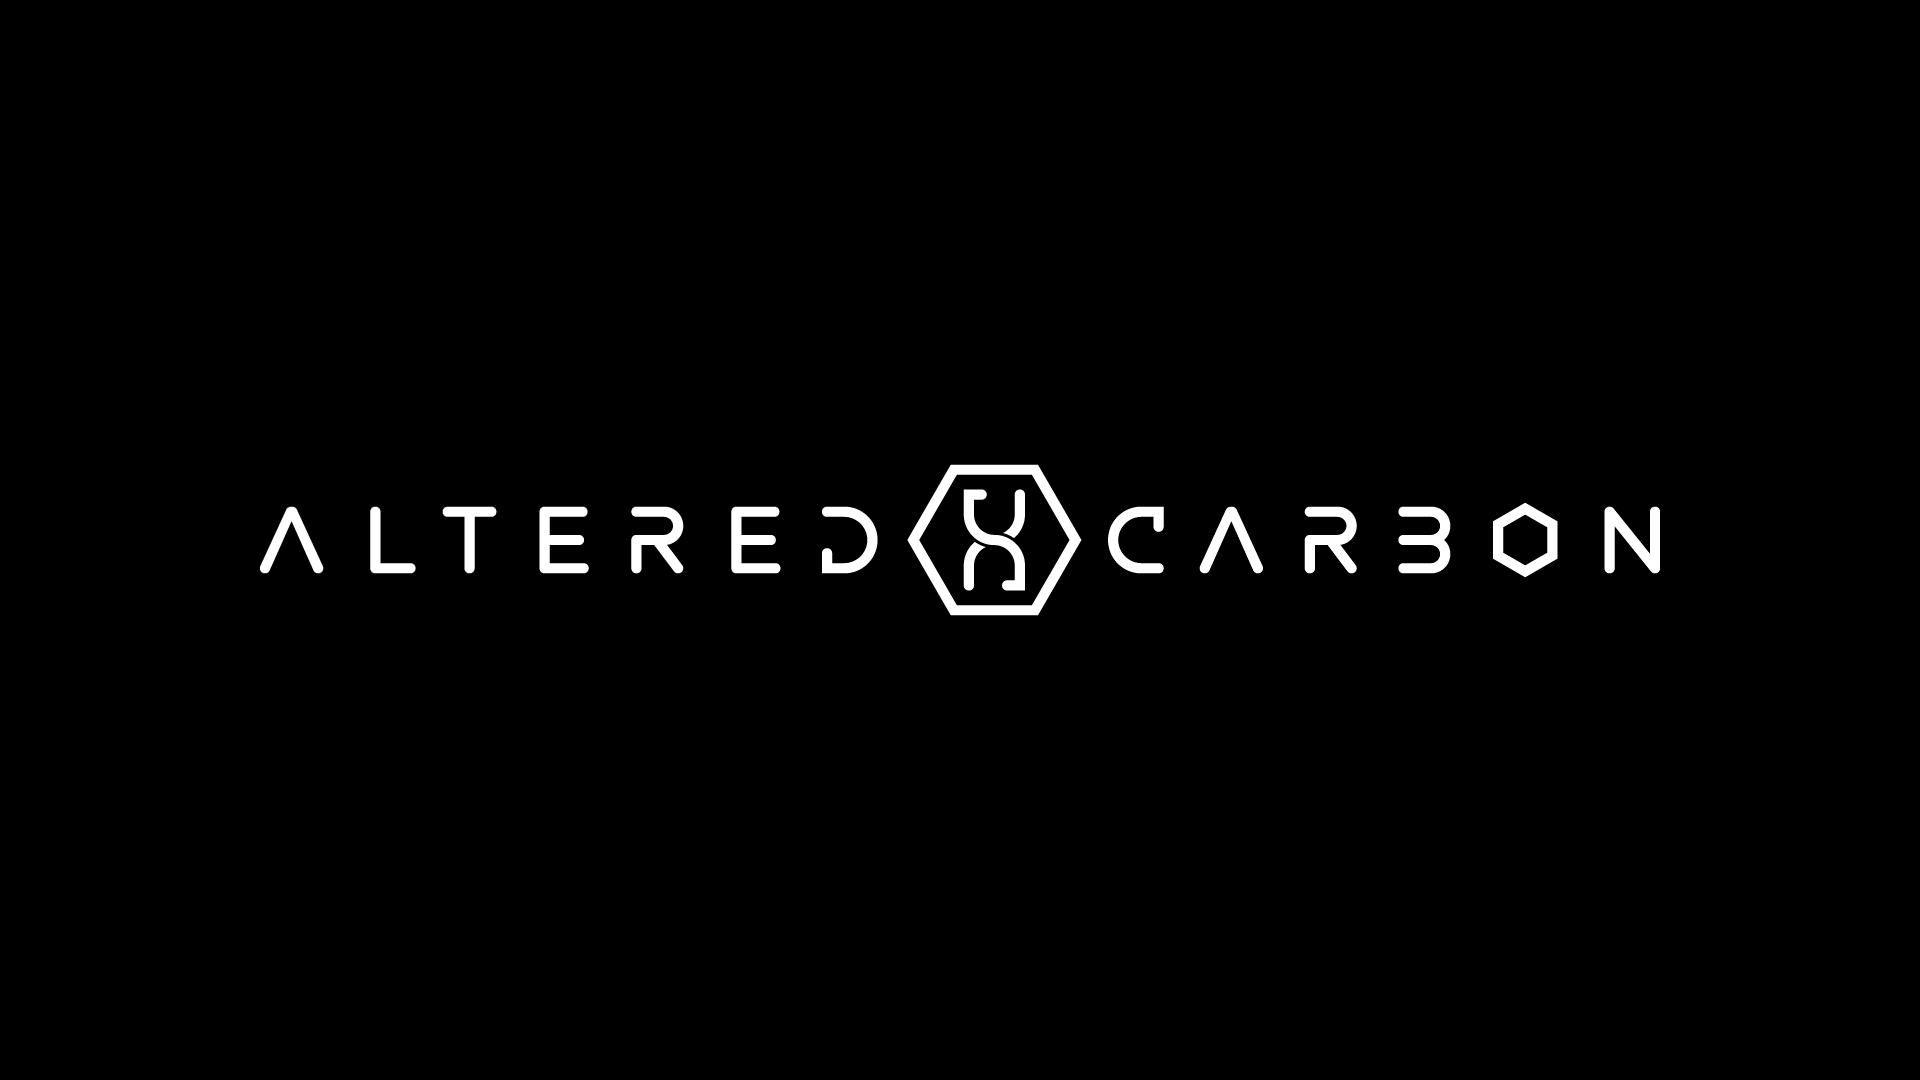 Altered Carbon Logo Wallpaper 62905 1920x1080 px